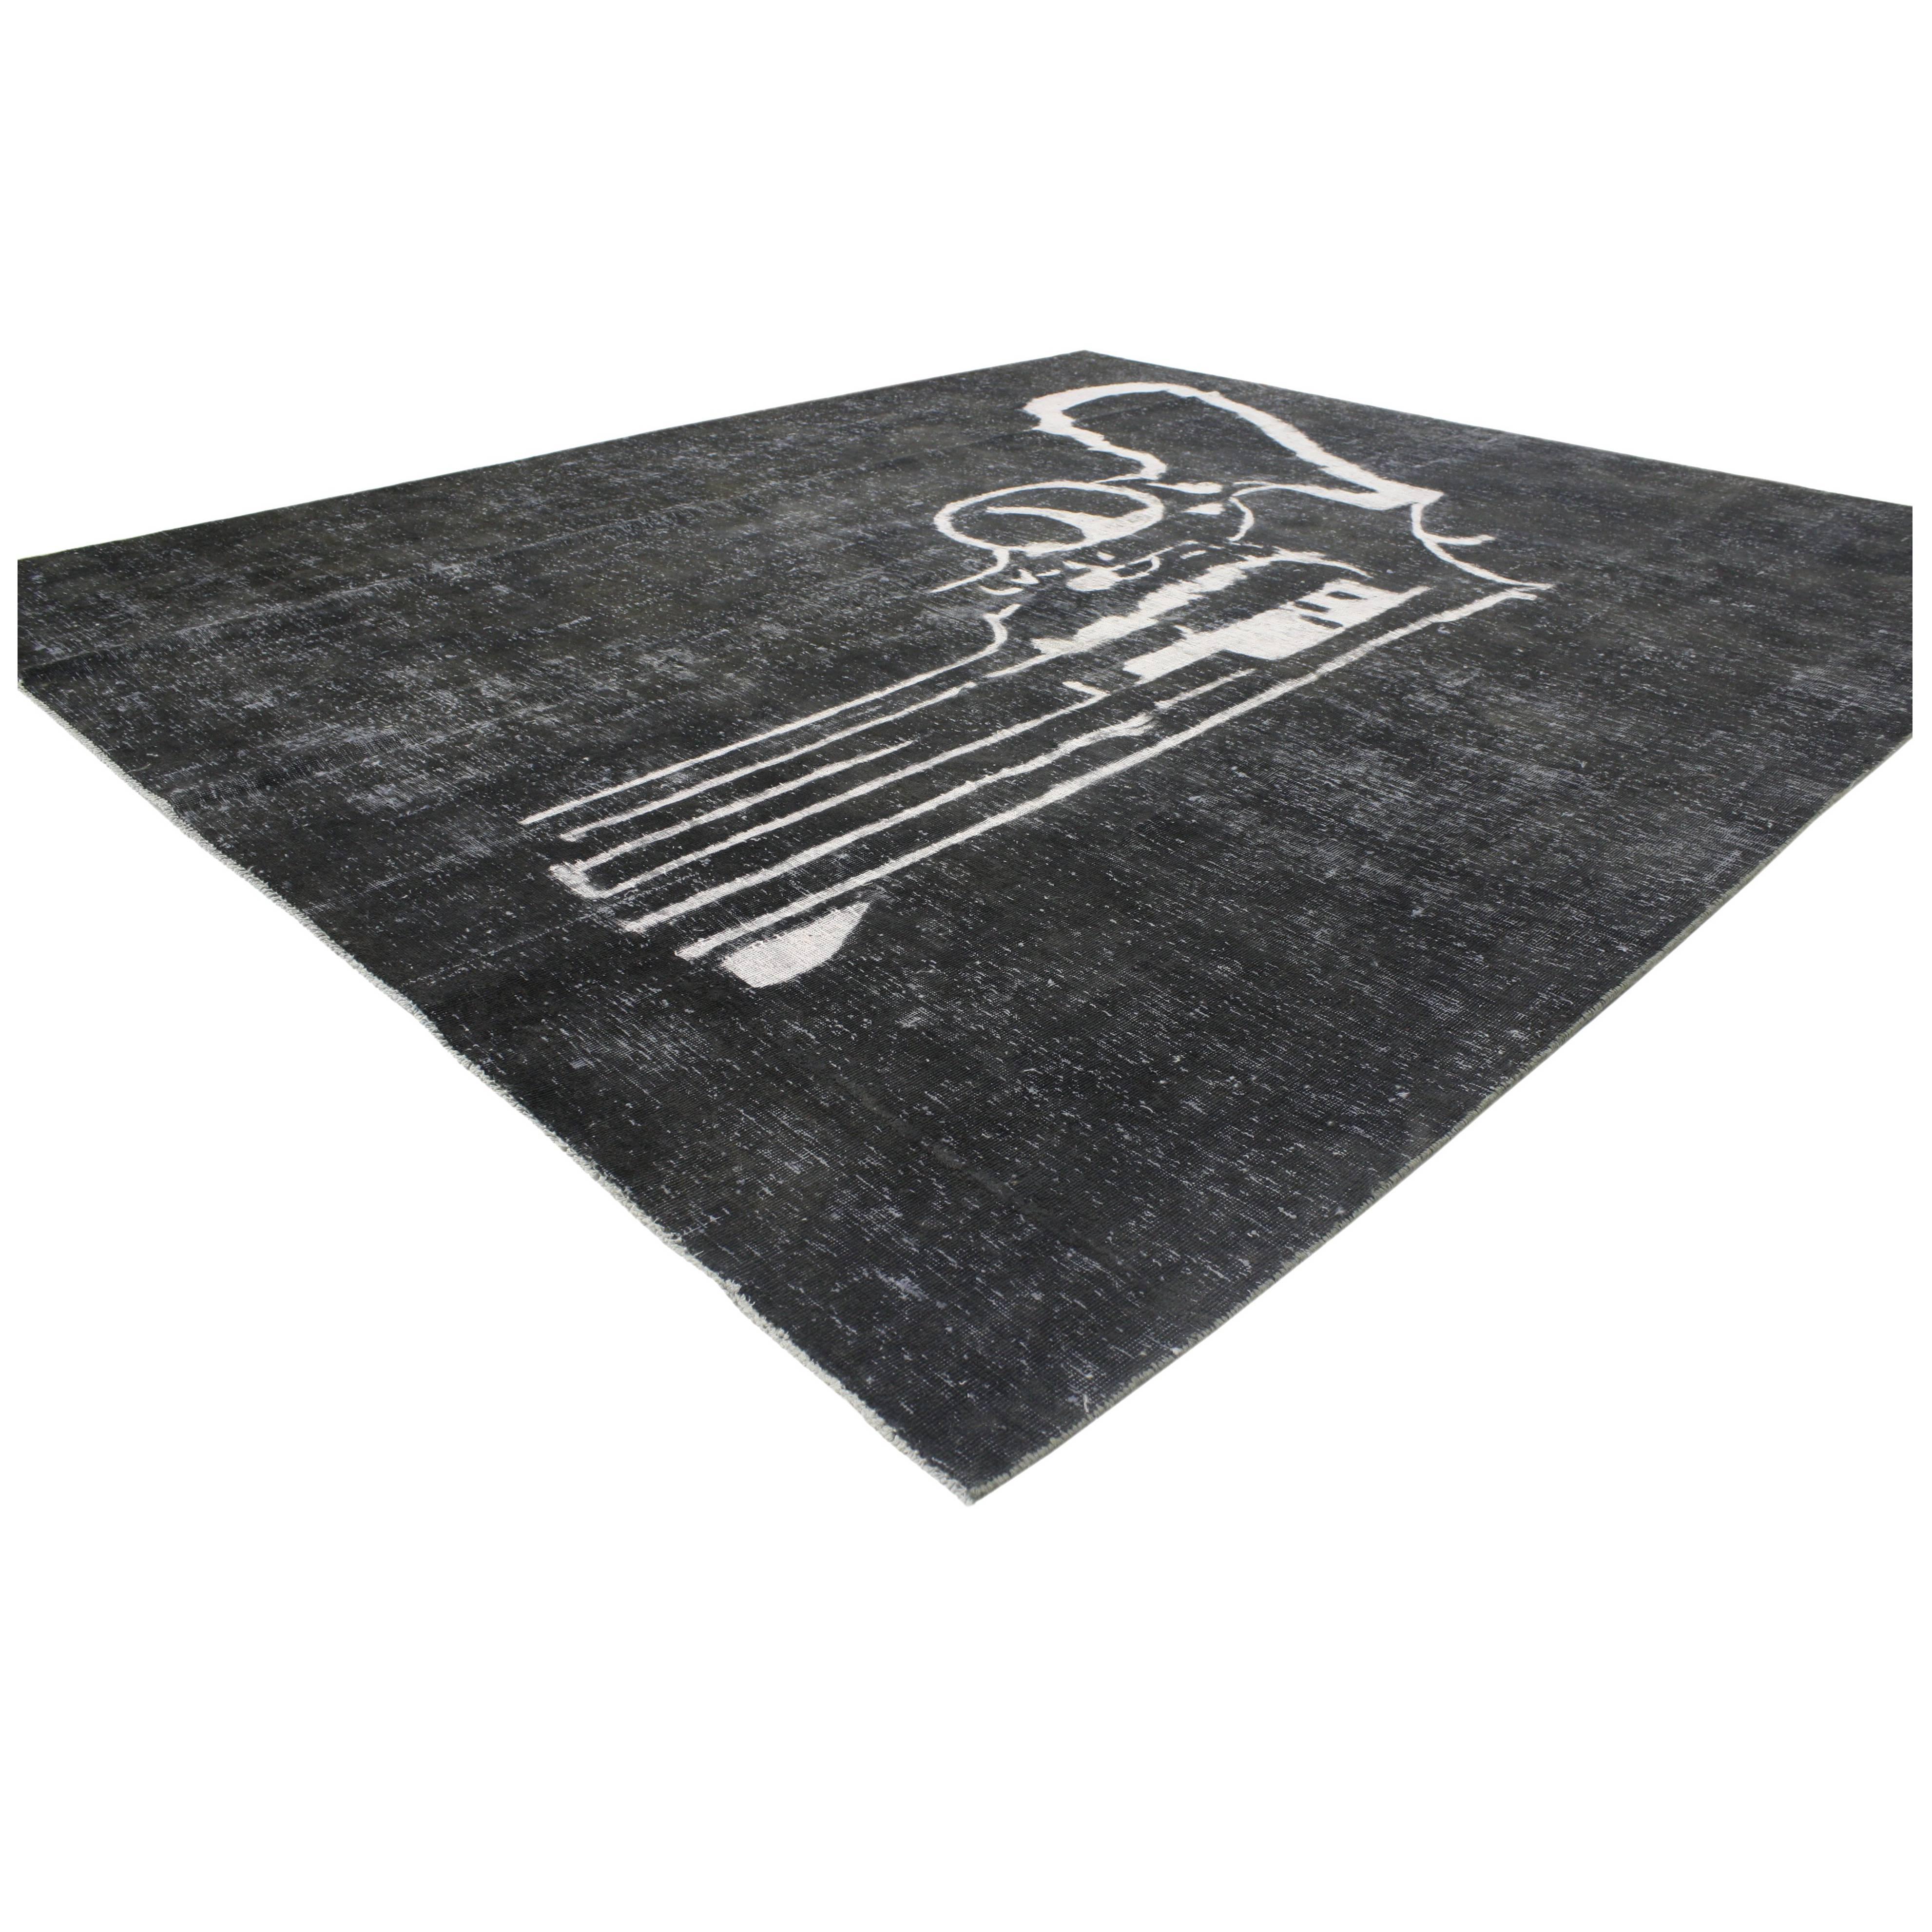 80386 2nd Amendment Vintage Overdyed Rug. Showcasing an esoteric design and artful craftsmanship, this vintage overdyed rug has been given a twist. The controversial pistol pattern and atmospheric colorway woven into this piece work together